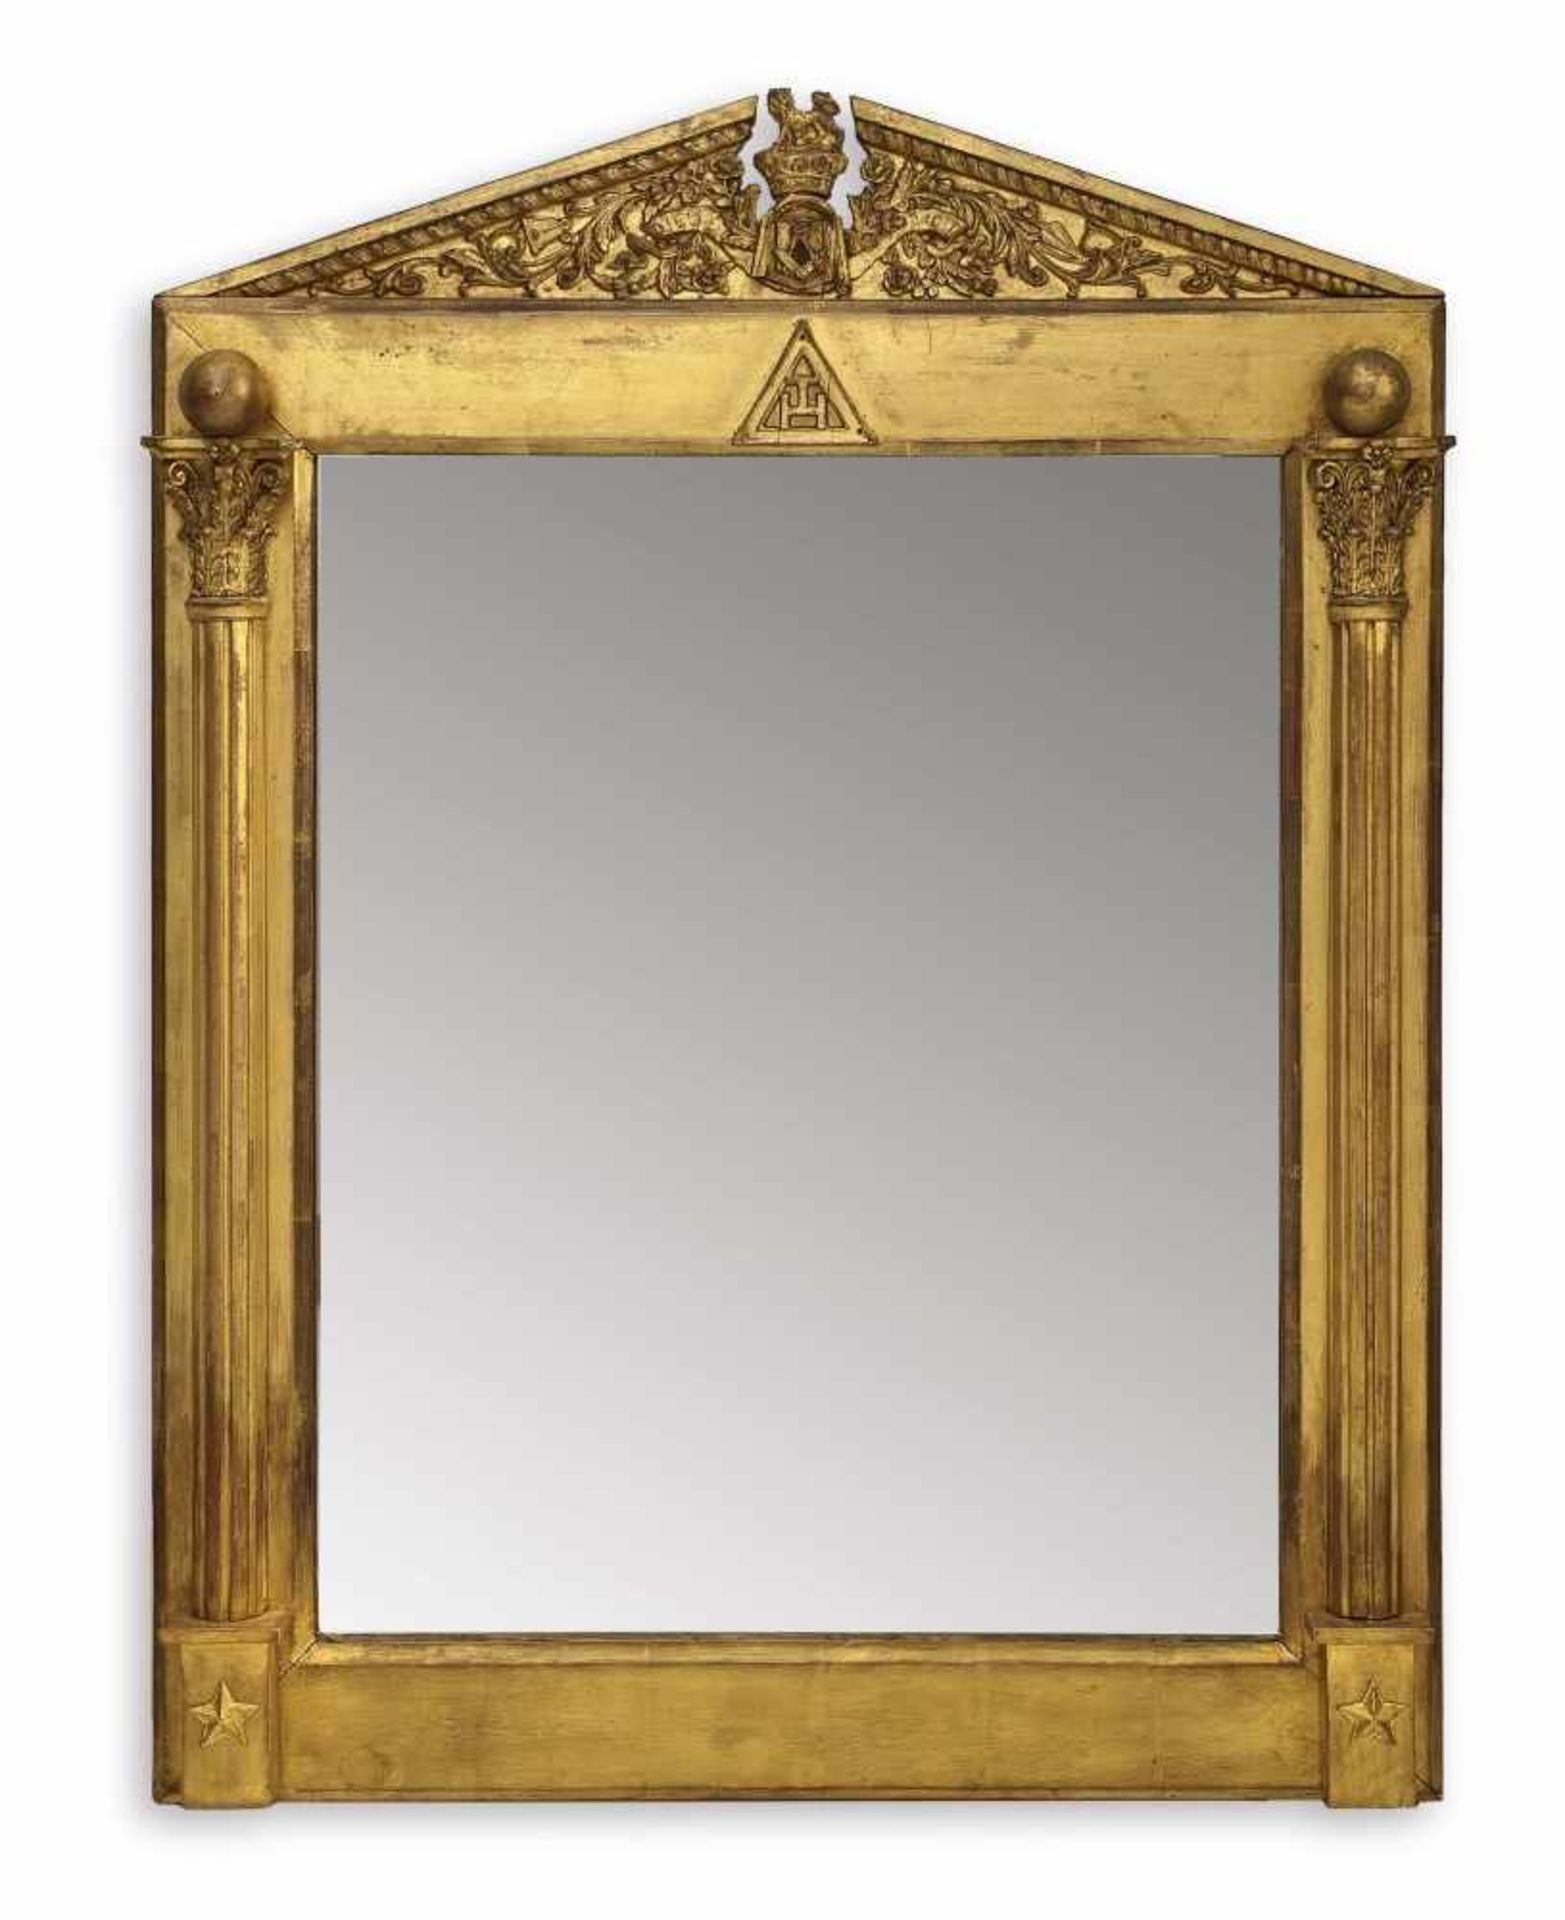 A mirrorEngland, mid-19th century Beechwood, carved, gold-plated and stucco. Signs of age. 76 x 56